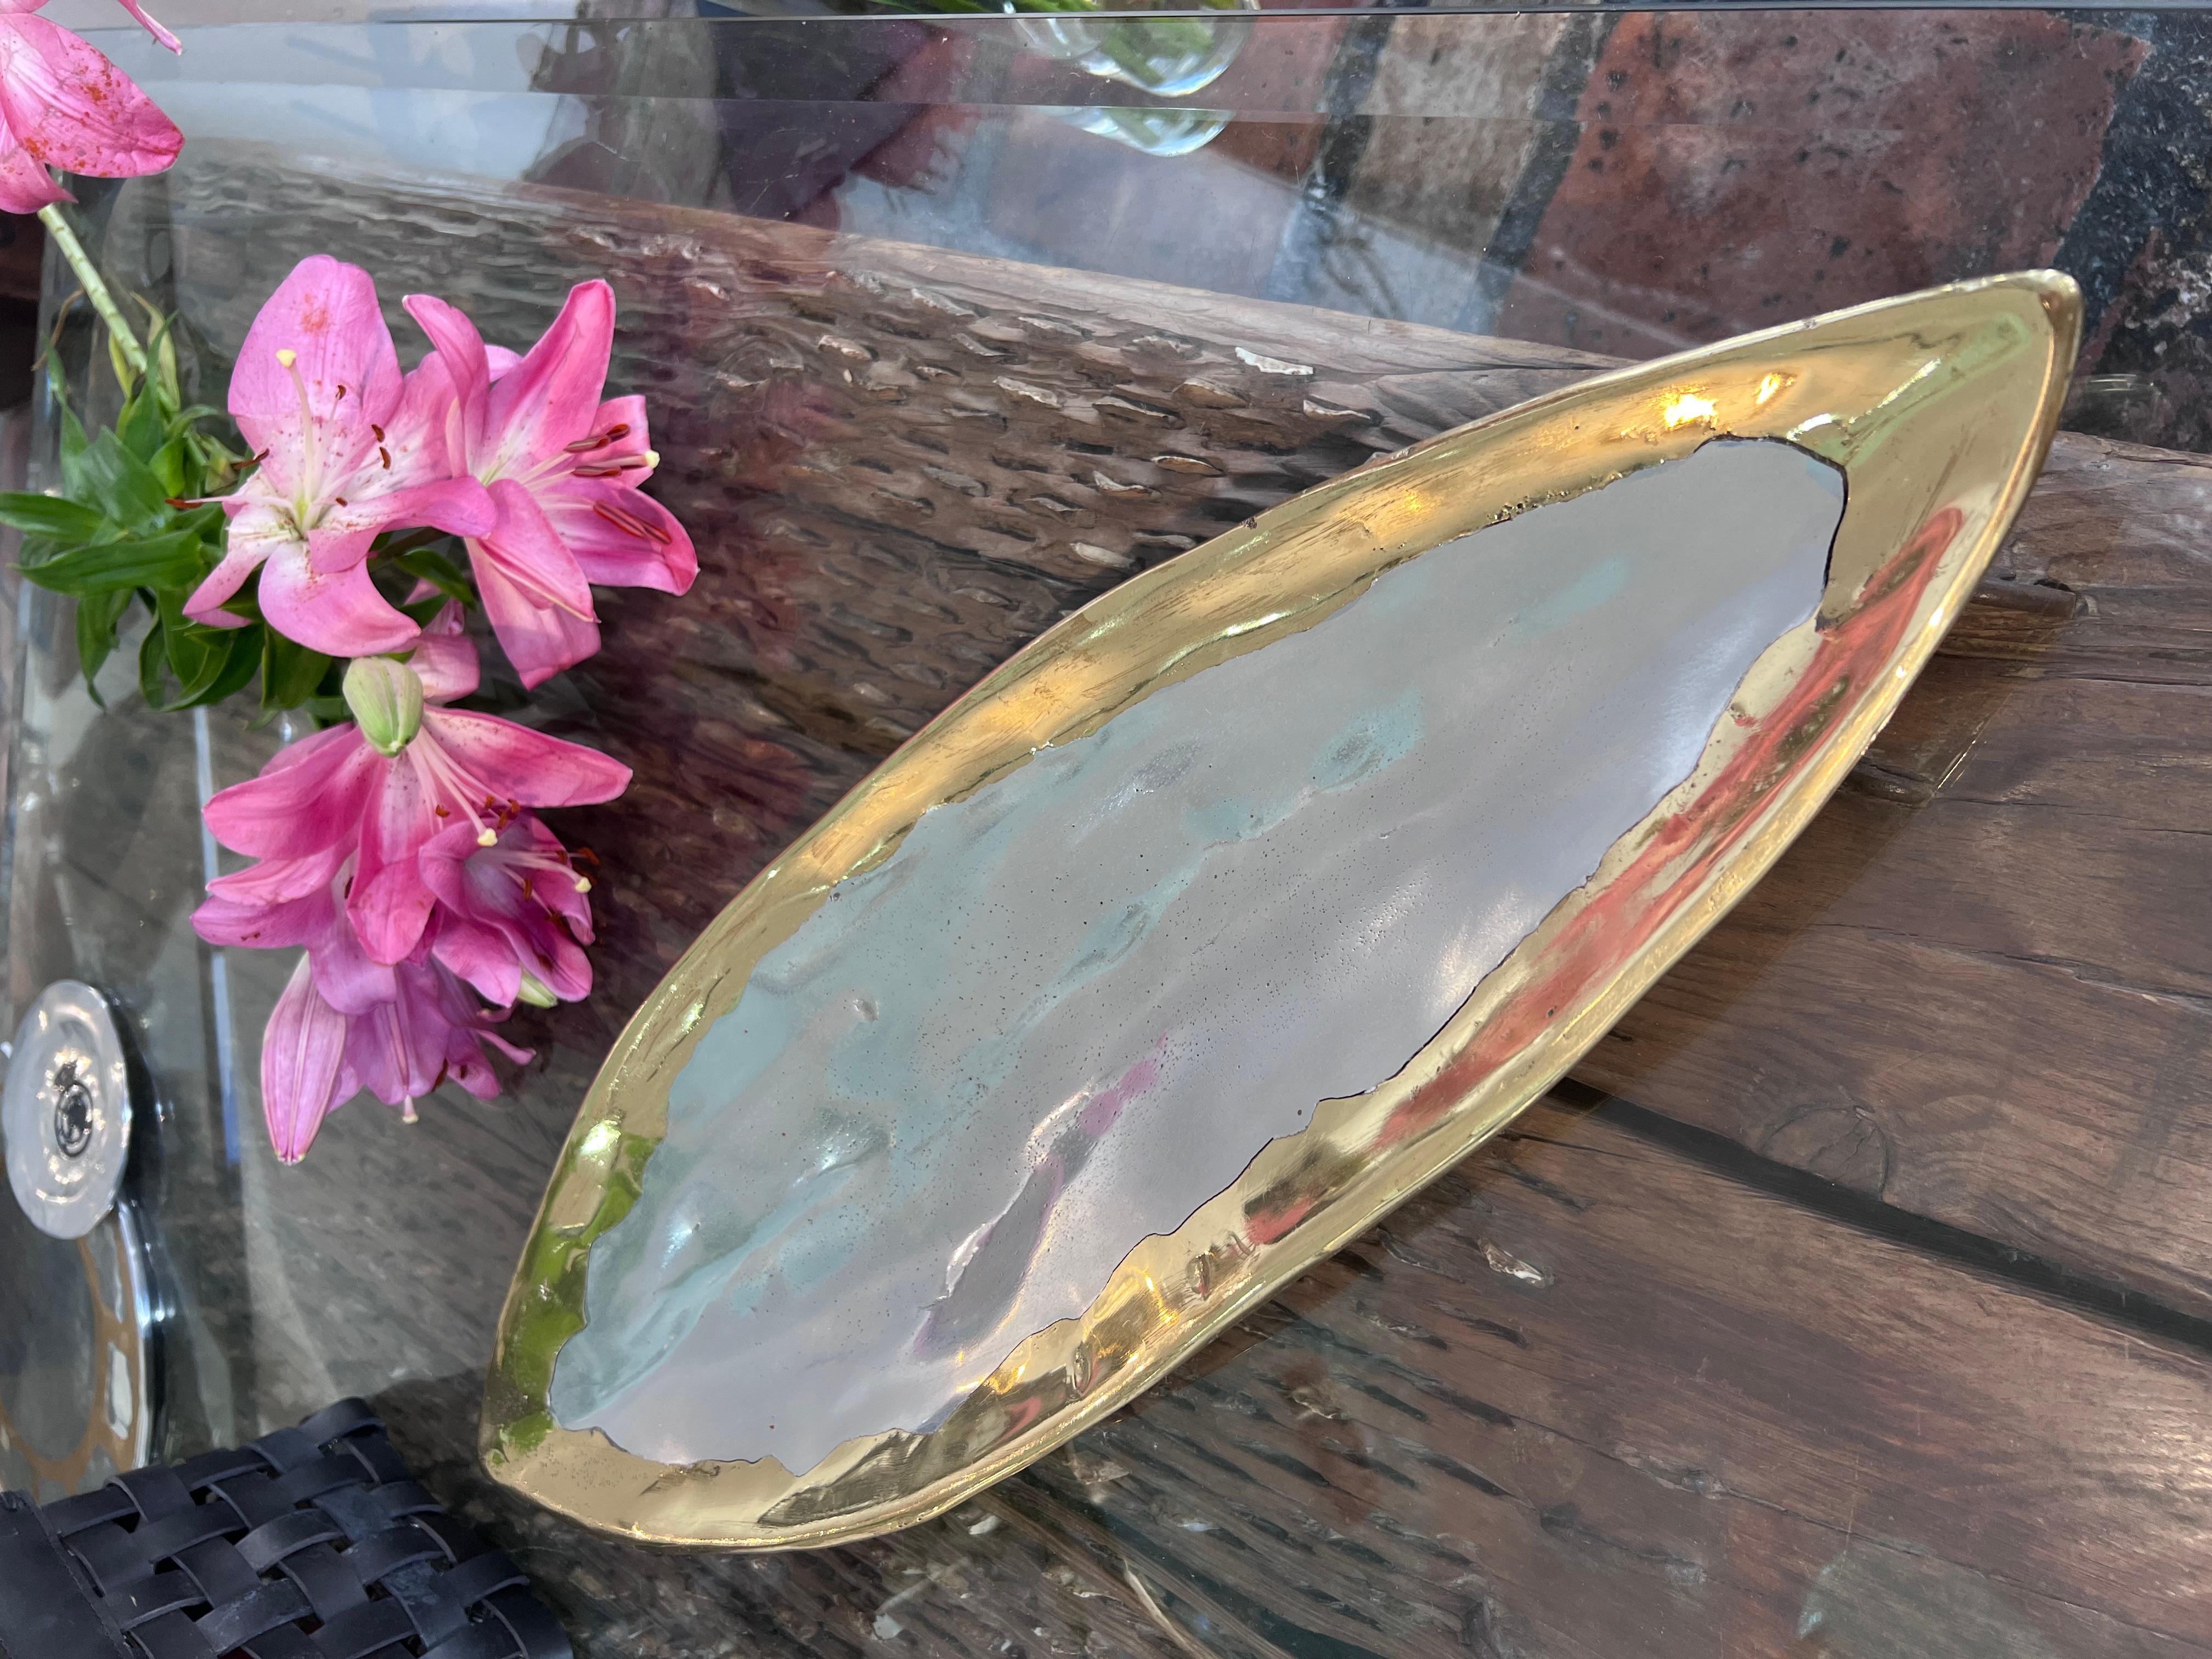 The decorative Canoa Dish was created by David Marshall, it is made of sand cast aluminum and sand cast brass.
Handmade, mounted and finished in our foundry and workshop in Spain from recycled materials.
Certified authentic by the Artist David